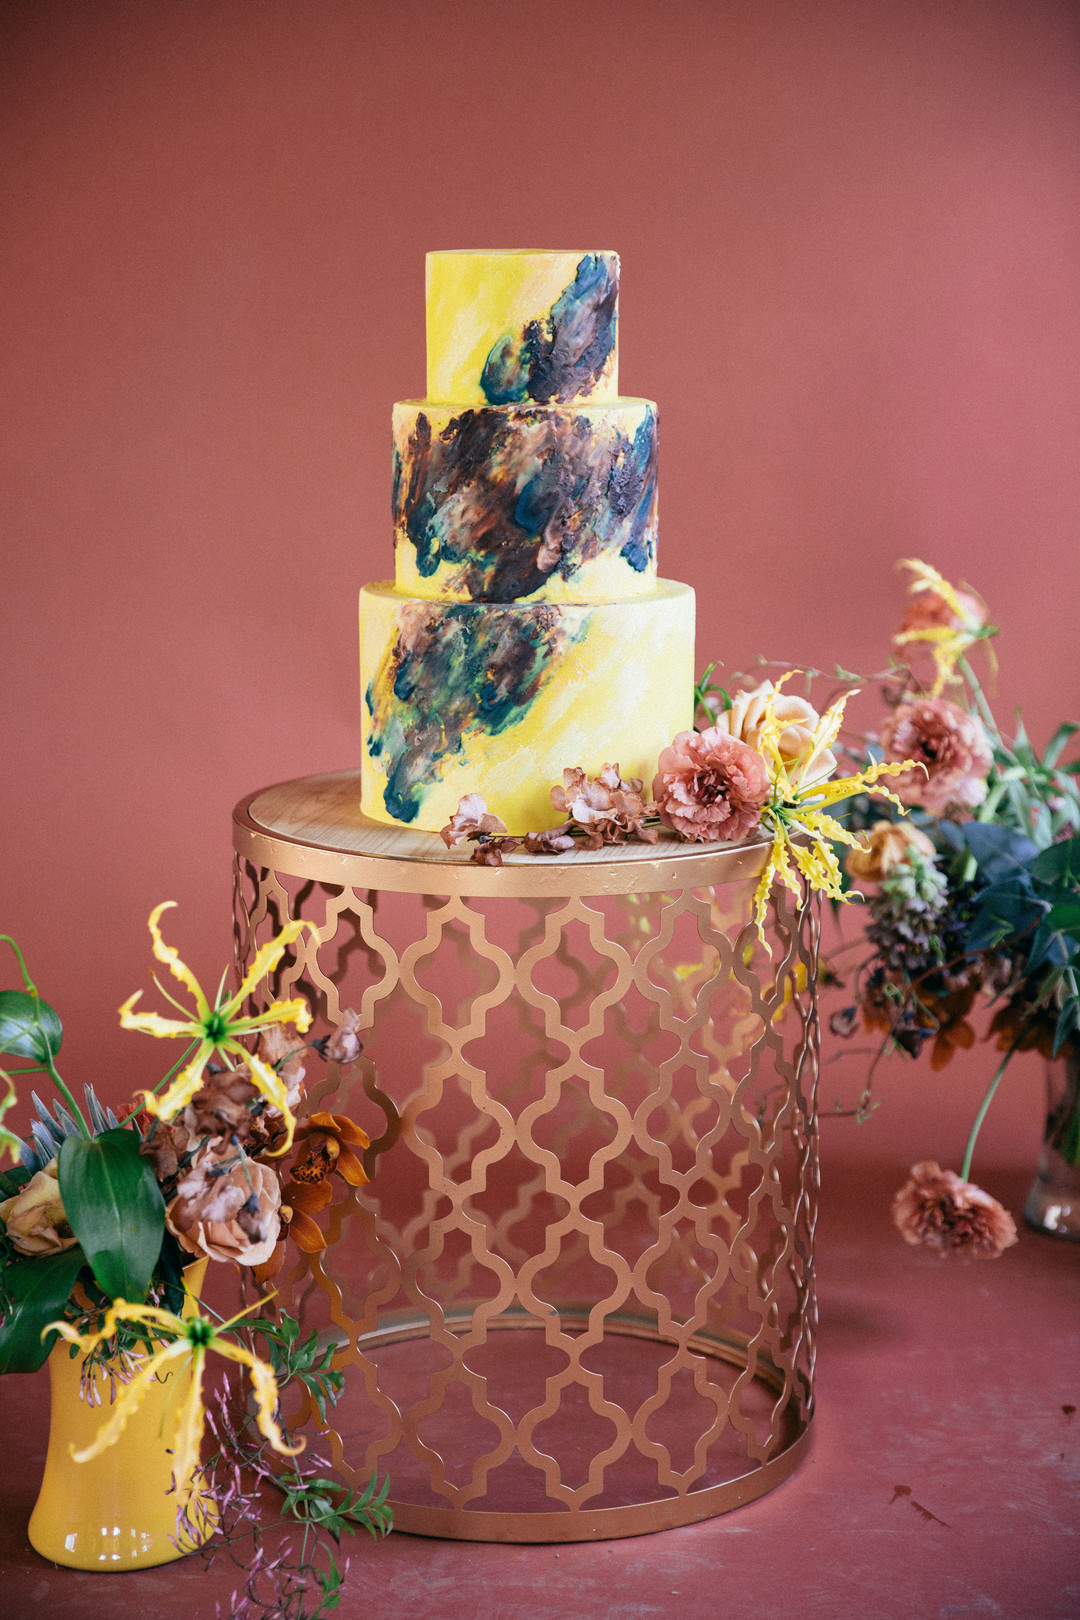 The wedding cake was done in bright yellow and decorated with dark and pastel brushstrokes